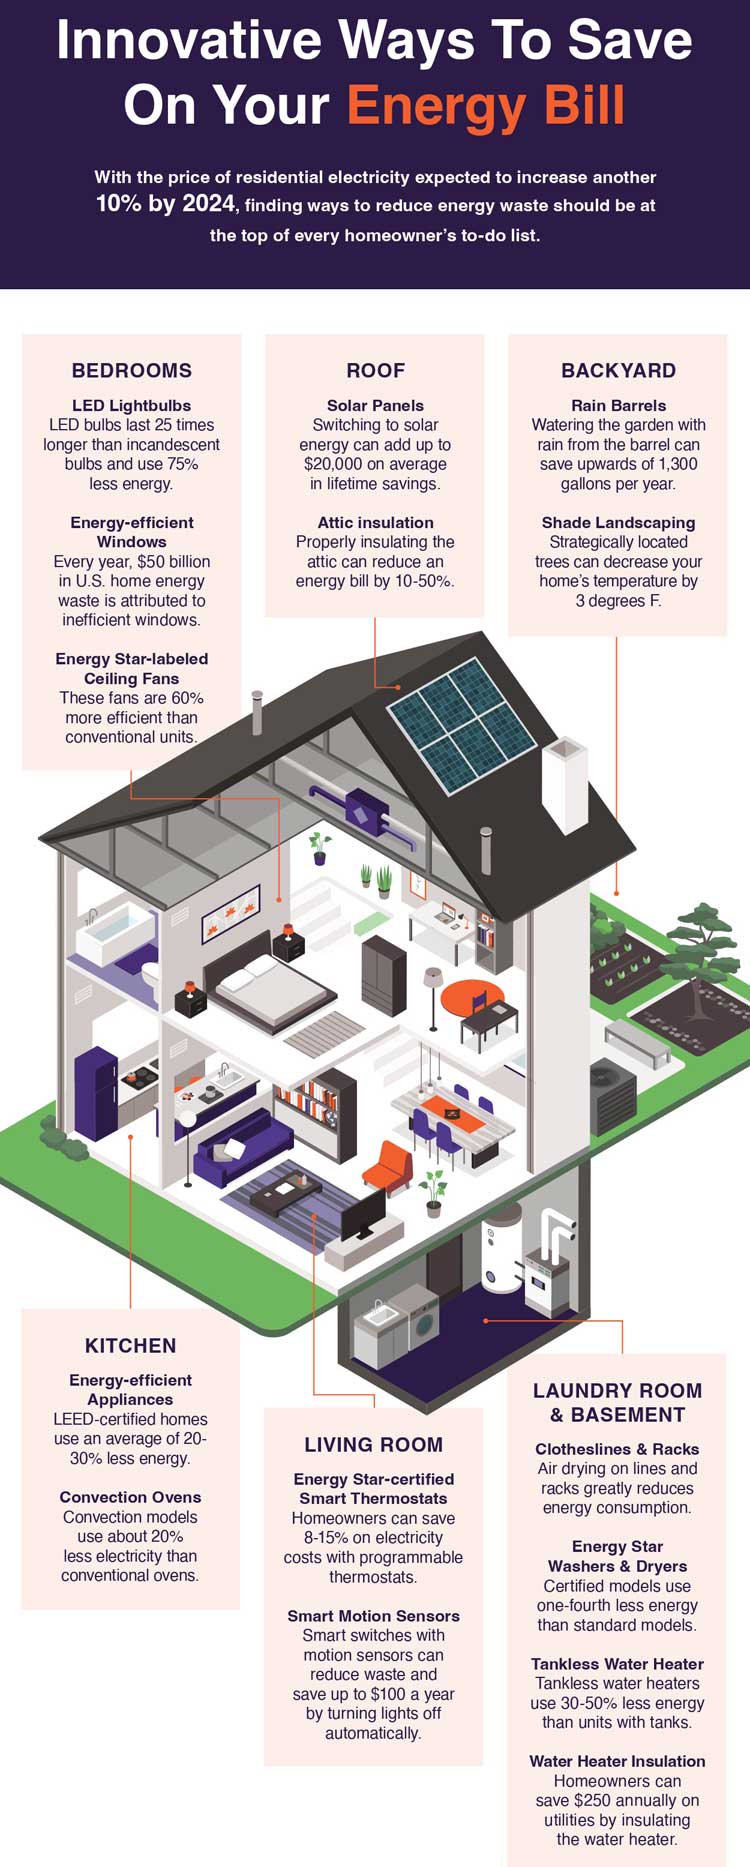 Ways-to-Save-Energy-Bill-infographic